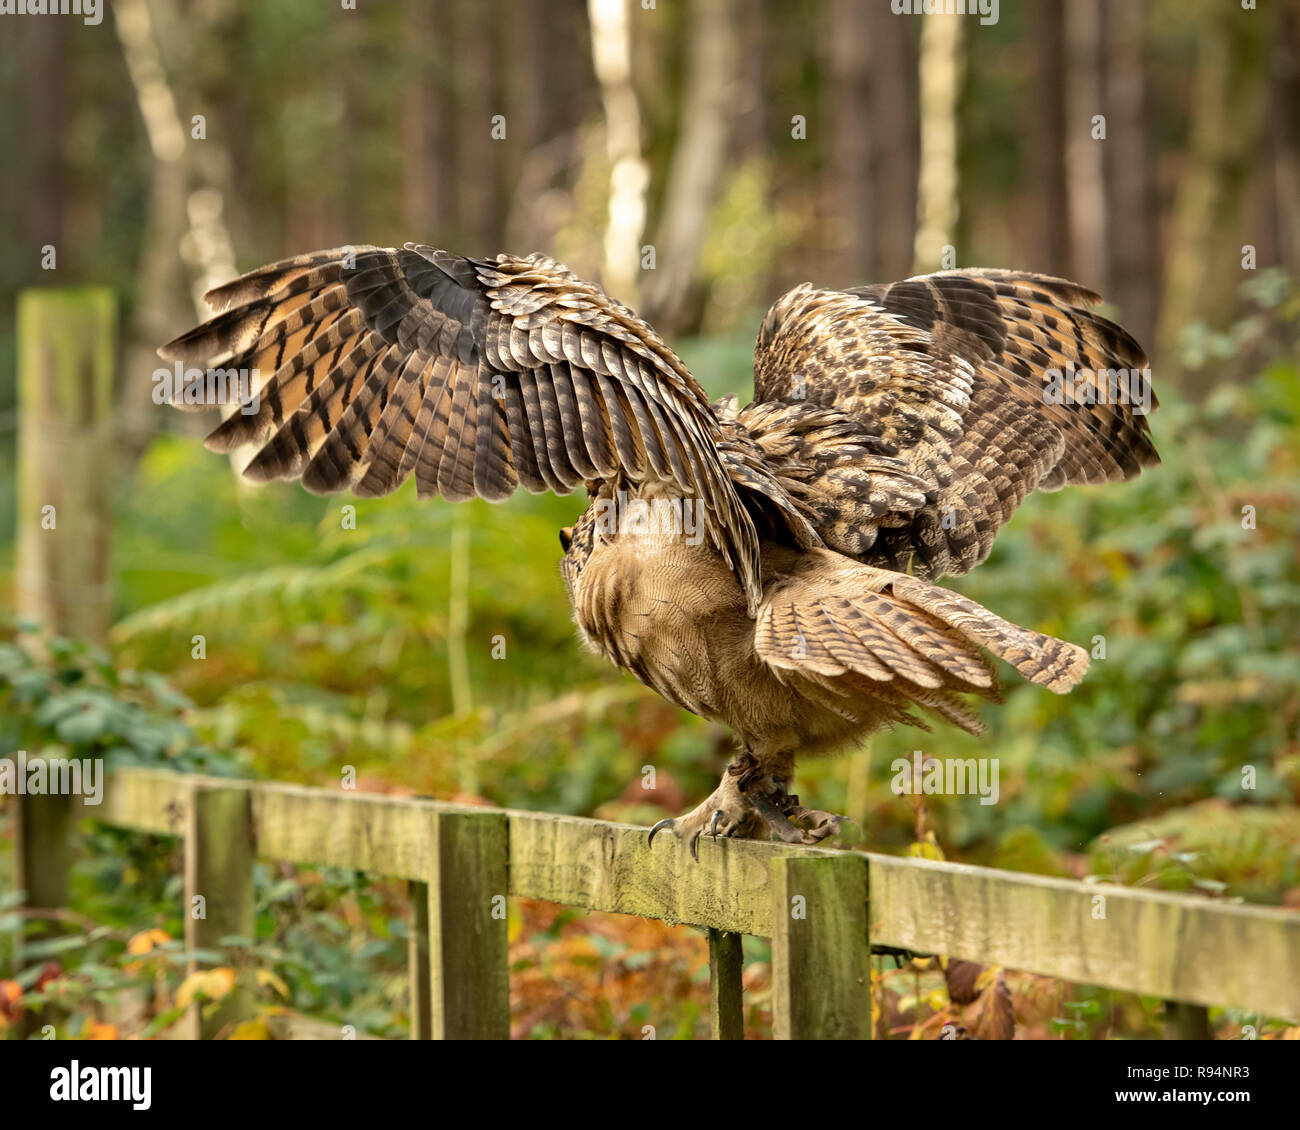 UK, Sherwood Forest, Nottinghamshire - October 2018:Spread wings of the Eurasion Eagle Owl Stock Photo